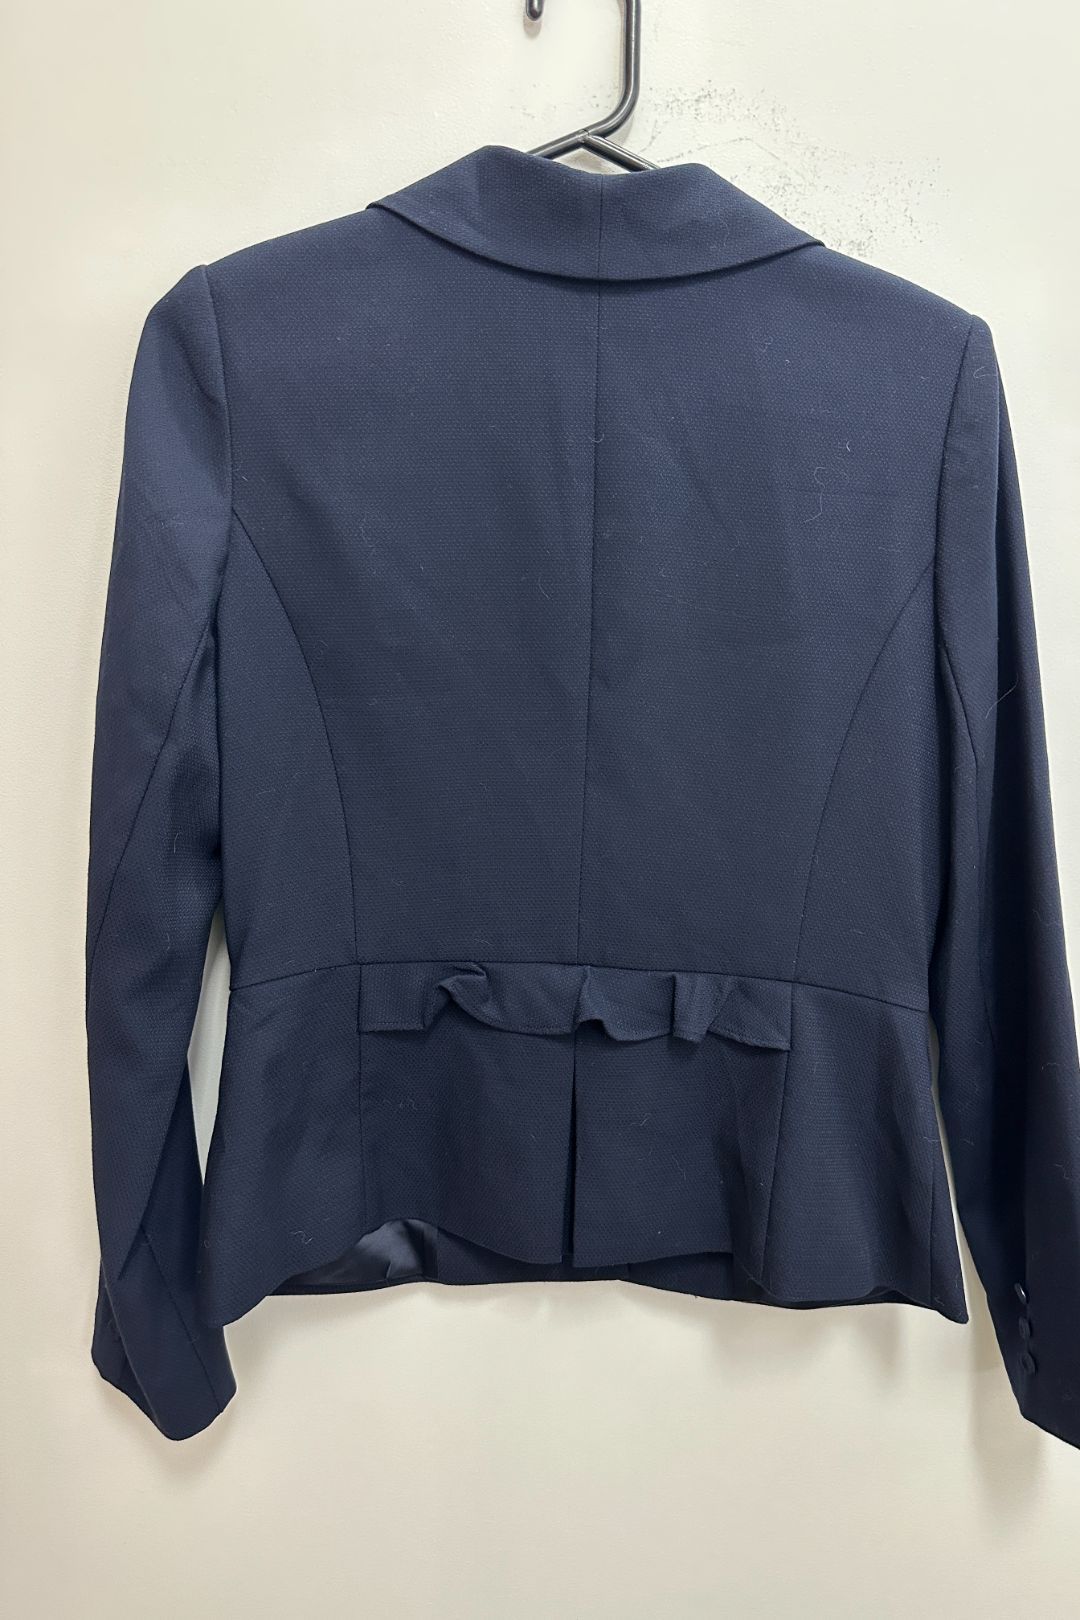 Review - Frill Back Jacket in Navy 